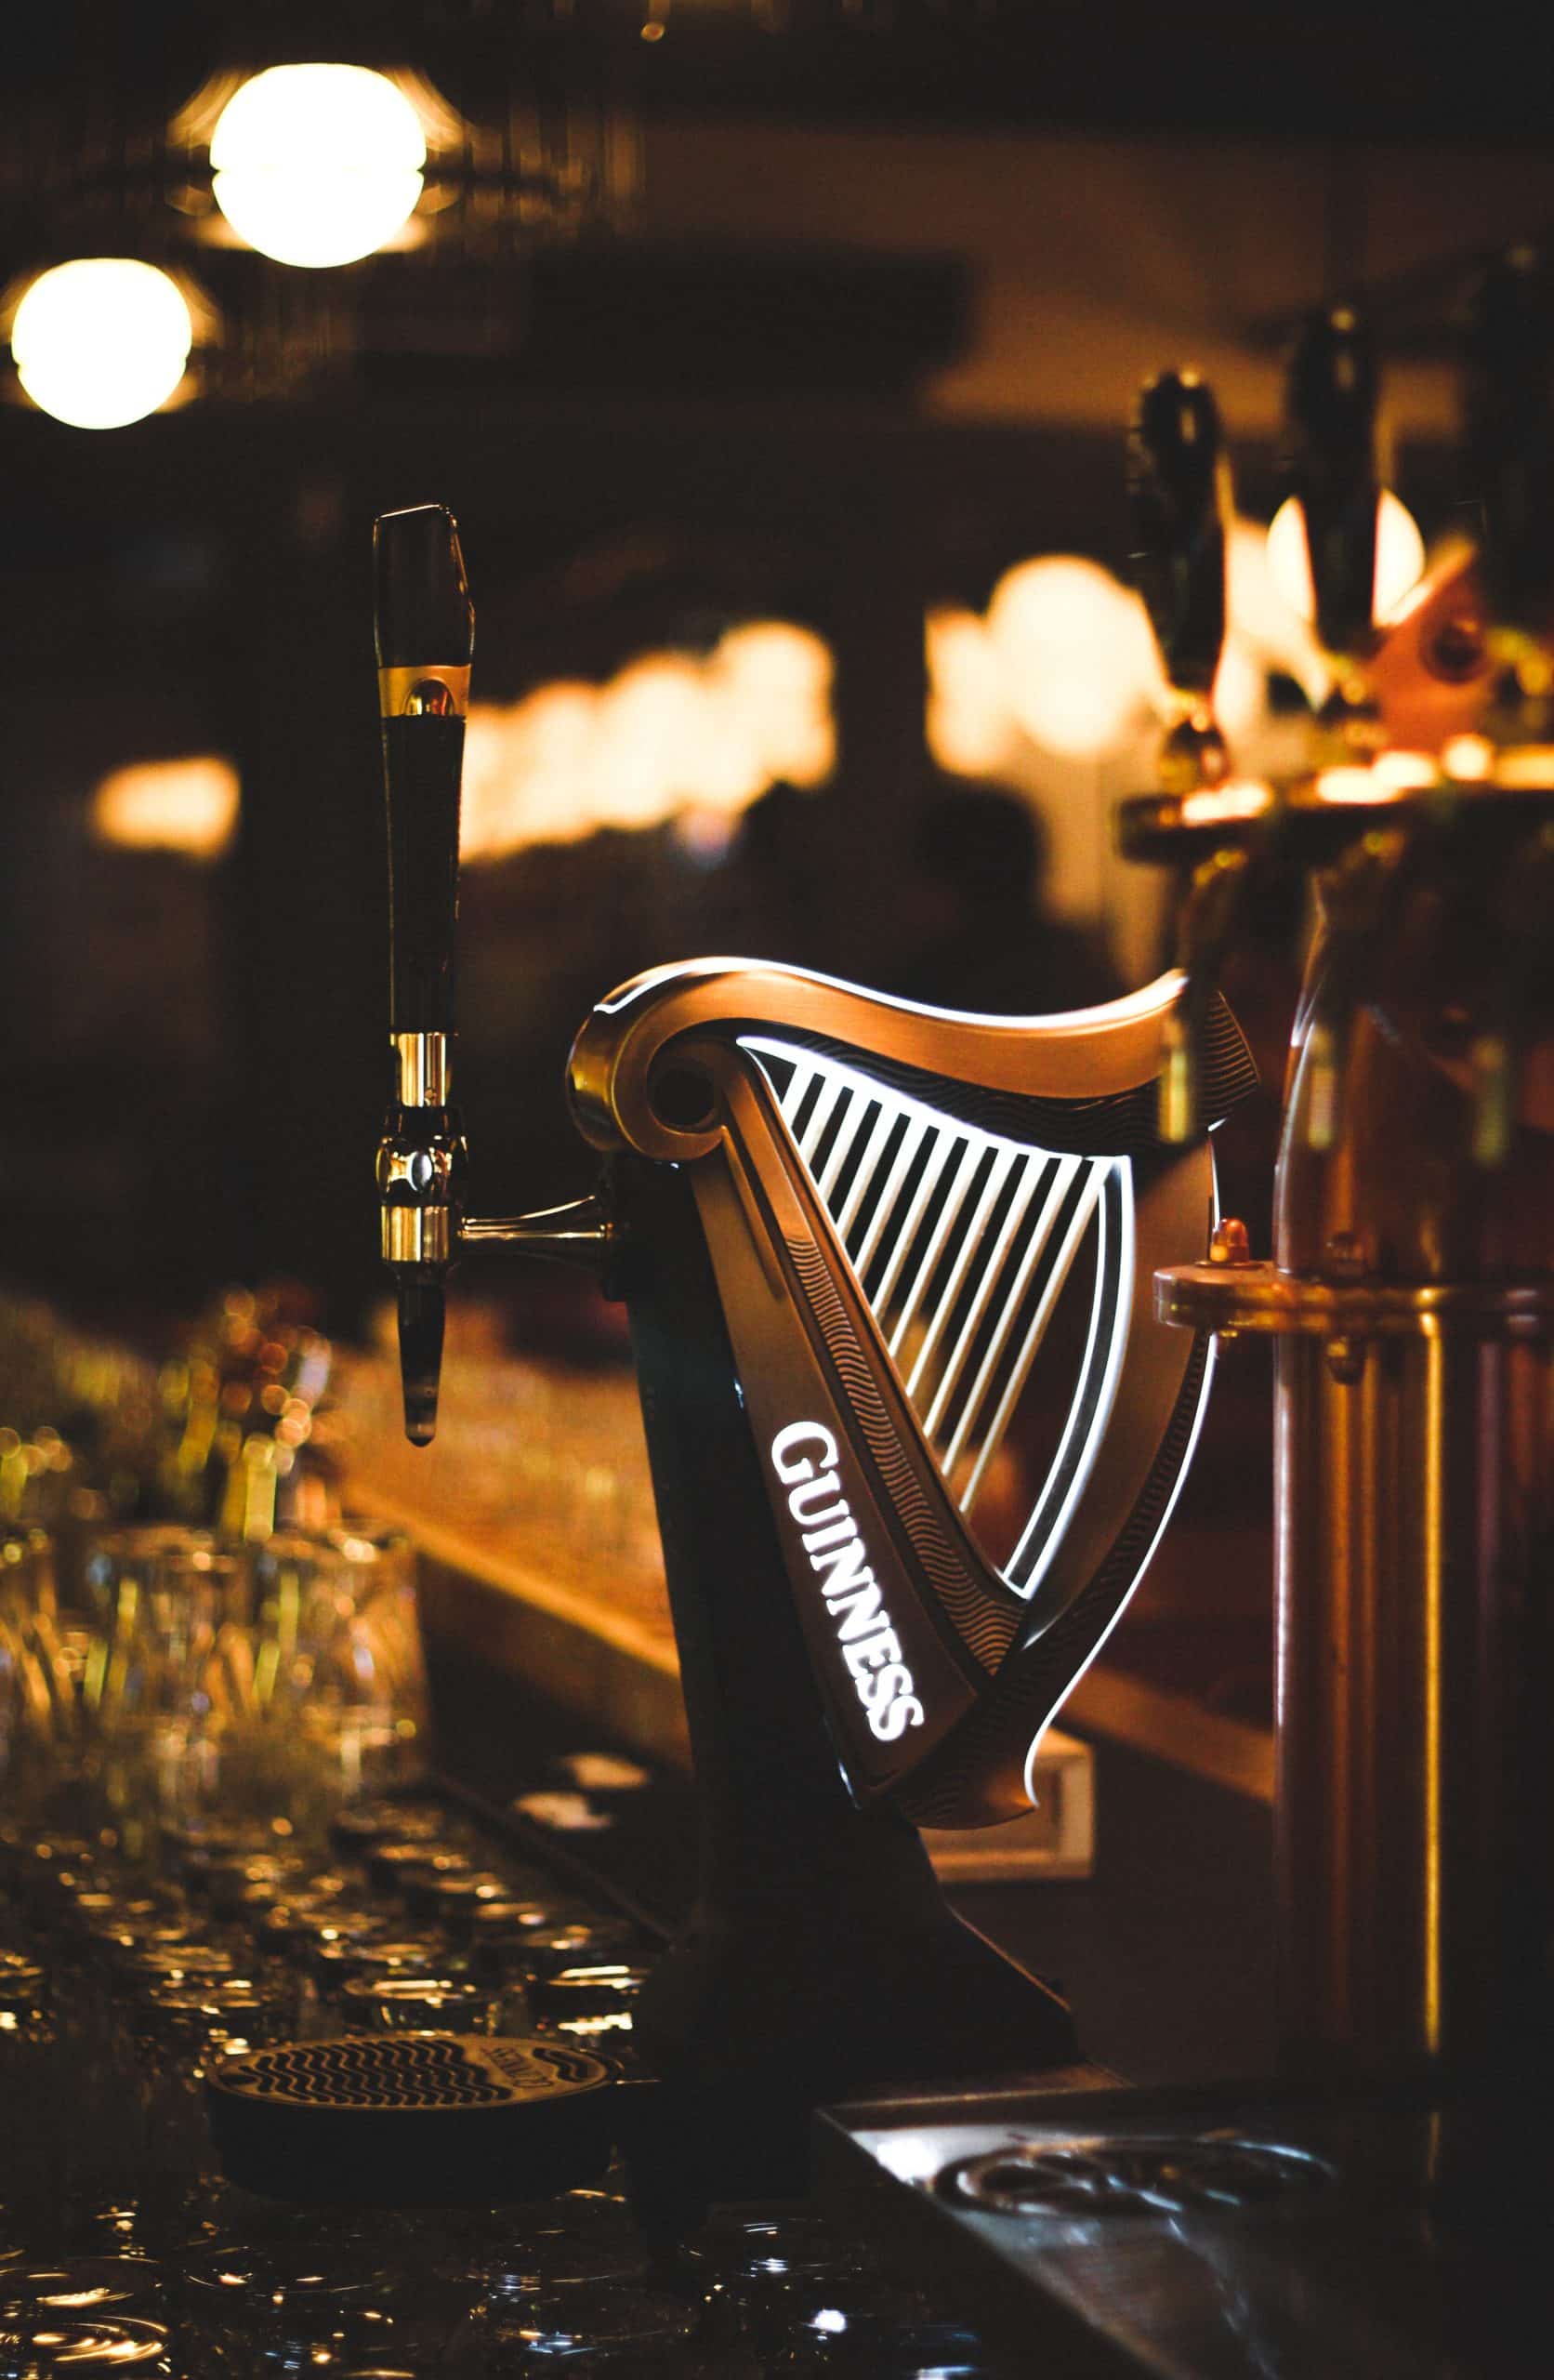 A themed beer pump in the shape of a harp with the word Guinness on the side